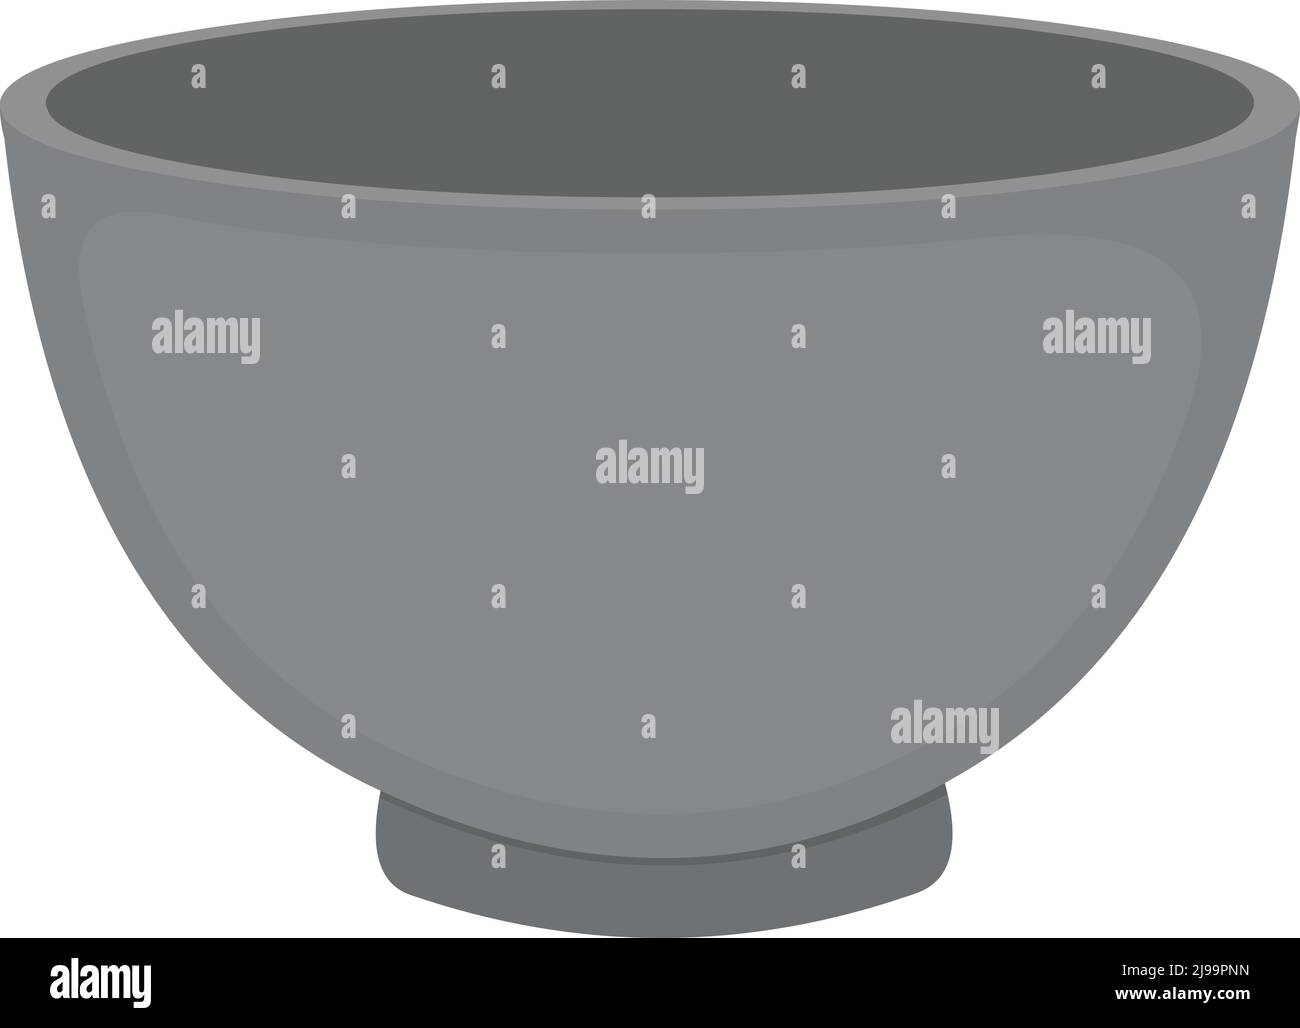 Vector illustration of a gray kitchen bowl Stock Vector